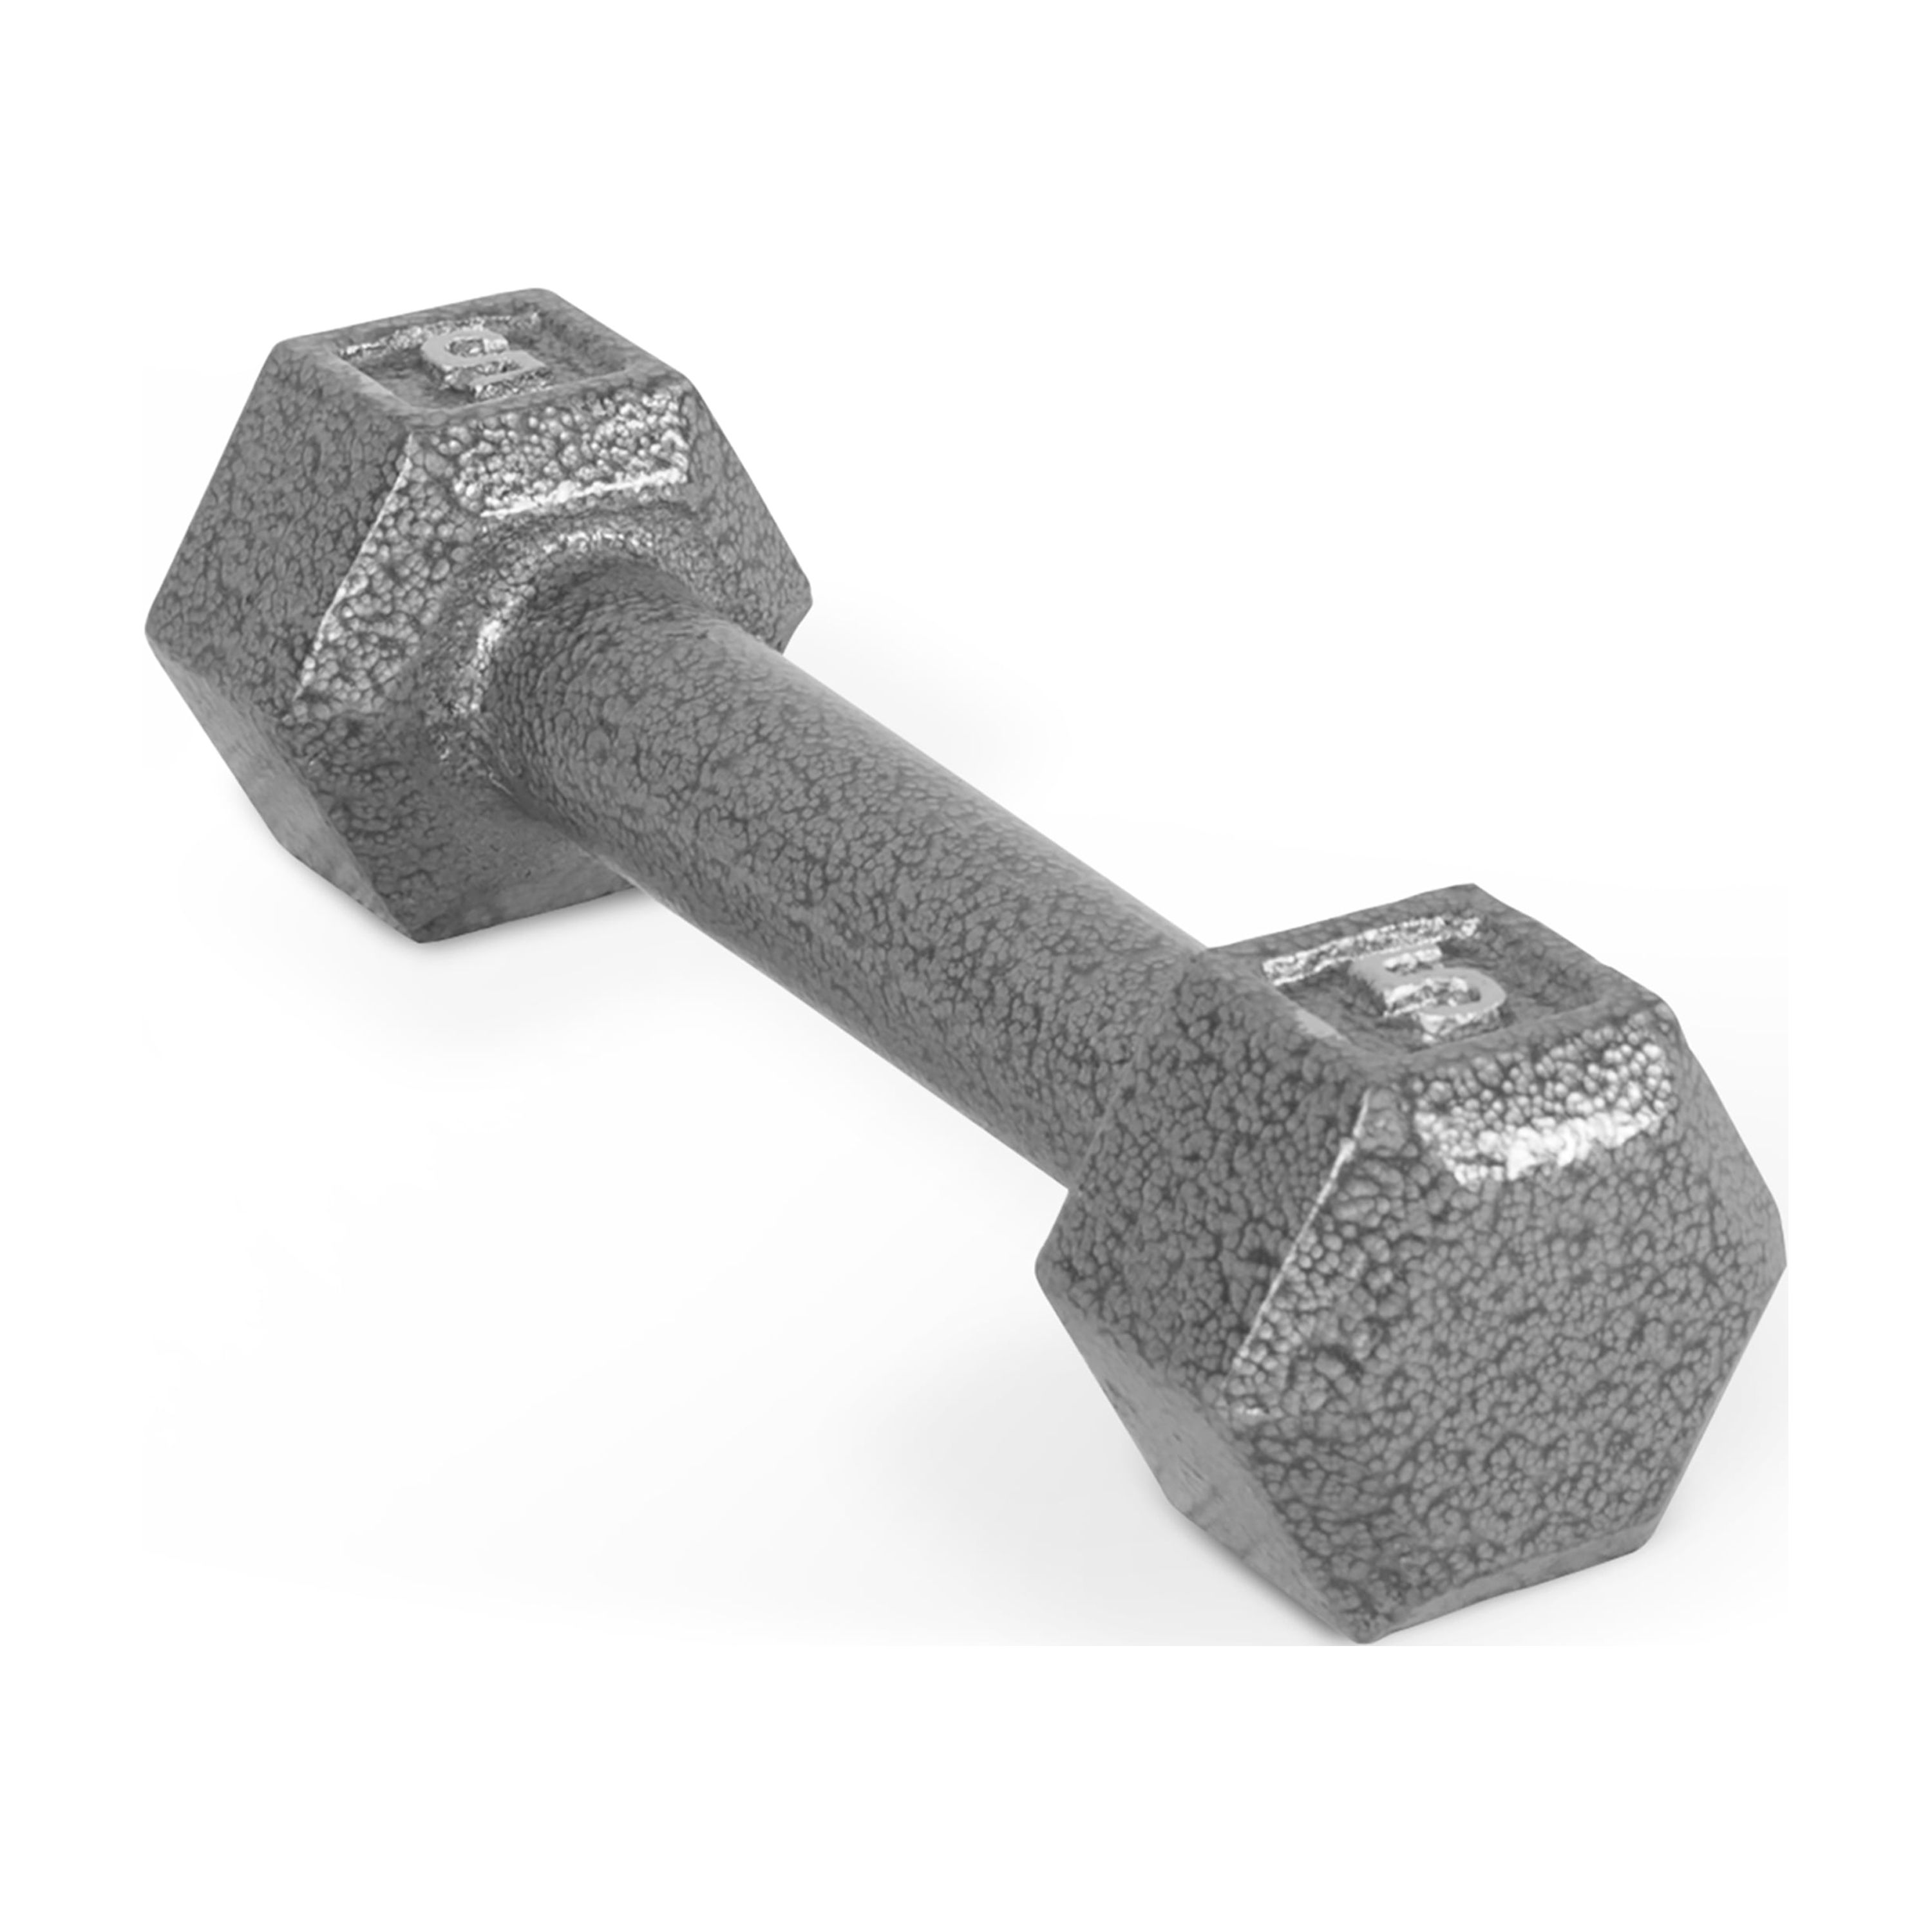 CAP Barbell 5lb Cast Iron Hex Dumbbell, Single - image 1 of 6